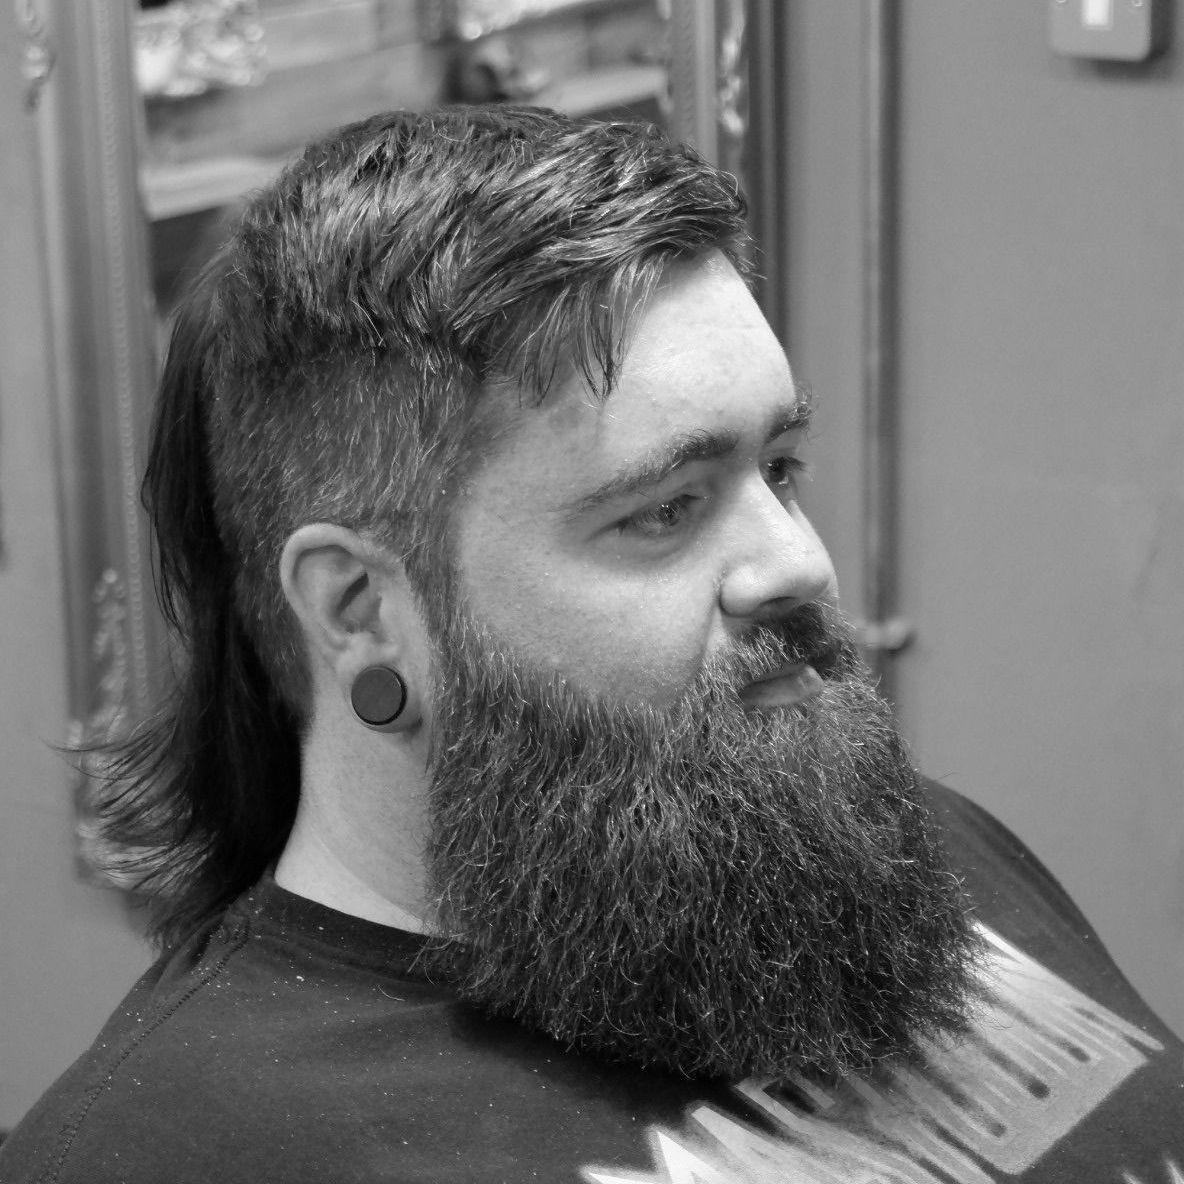 Beards and mullets. Mullets and beards. Whichever way around, it's a classic combo.

#worthing #worthingbarber #worthingbarbershop #worthingbusiness #beards #barber #barberlife #barberconnect #haircuts #barberstyle #hairdresser #barberpost #wahlpro #barbersince #barberhub